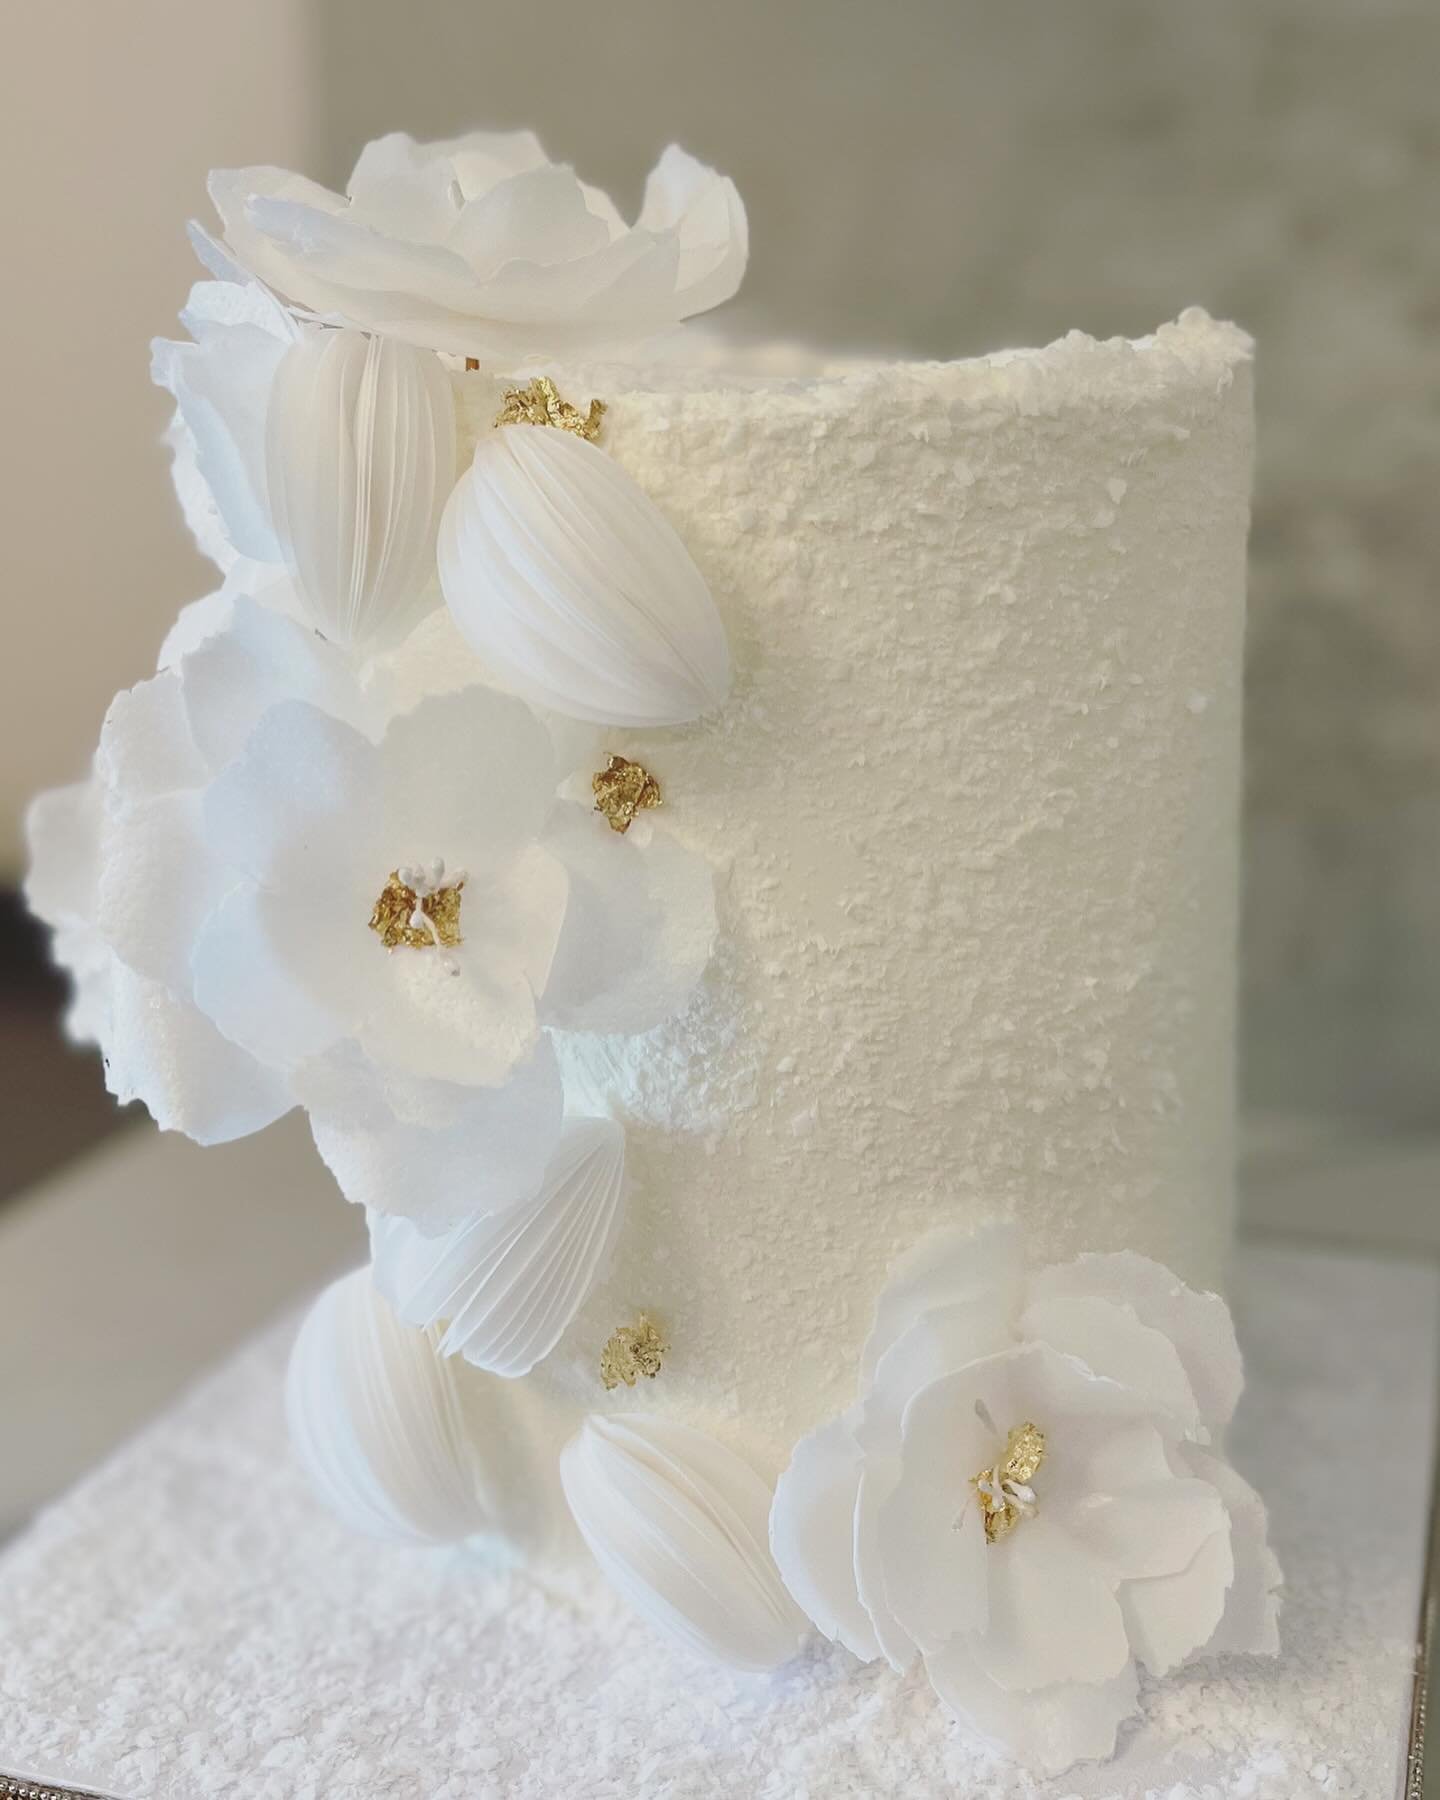 What do you think about this wafer paper inspired cake?

I&rsquo;ve always thought wafer paper flowers were time consuming but to be honest they are not. I had so much fun making this cake. I used my fondant flower cutter to create this. 

So this we